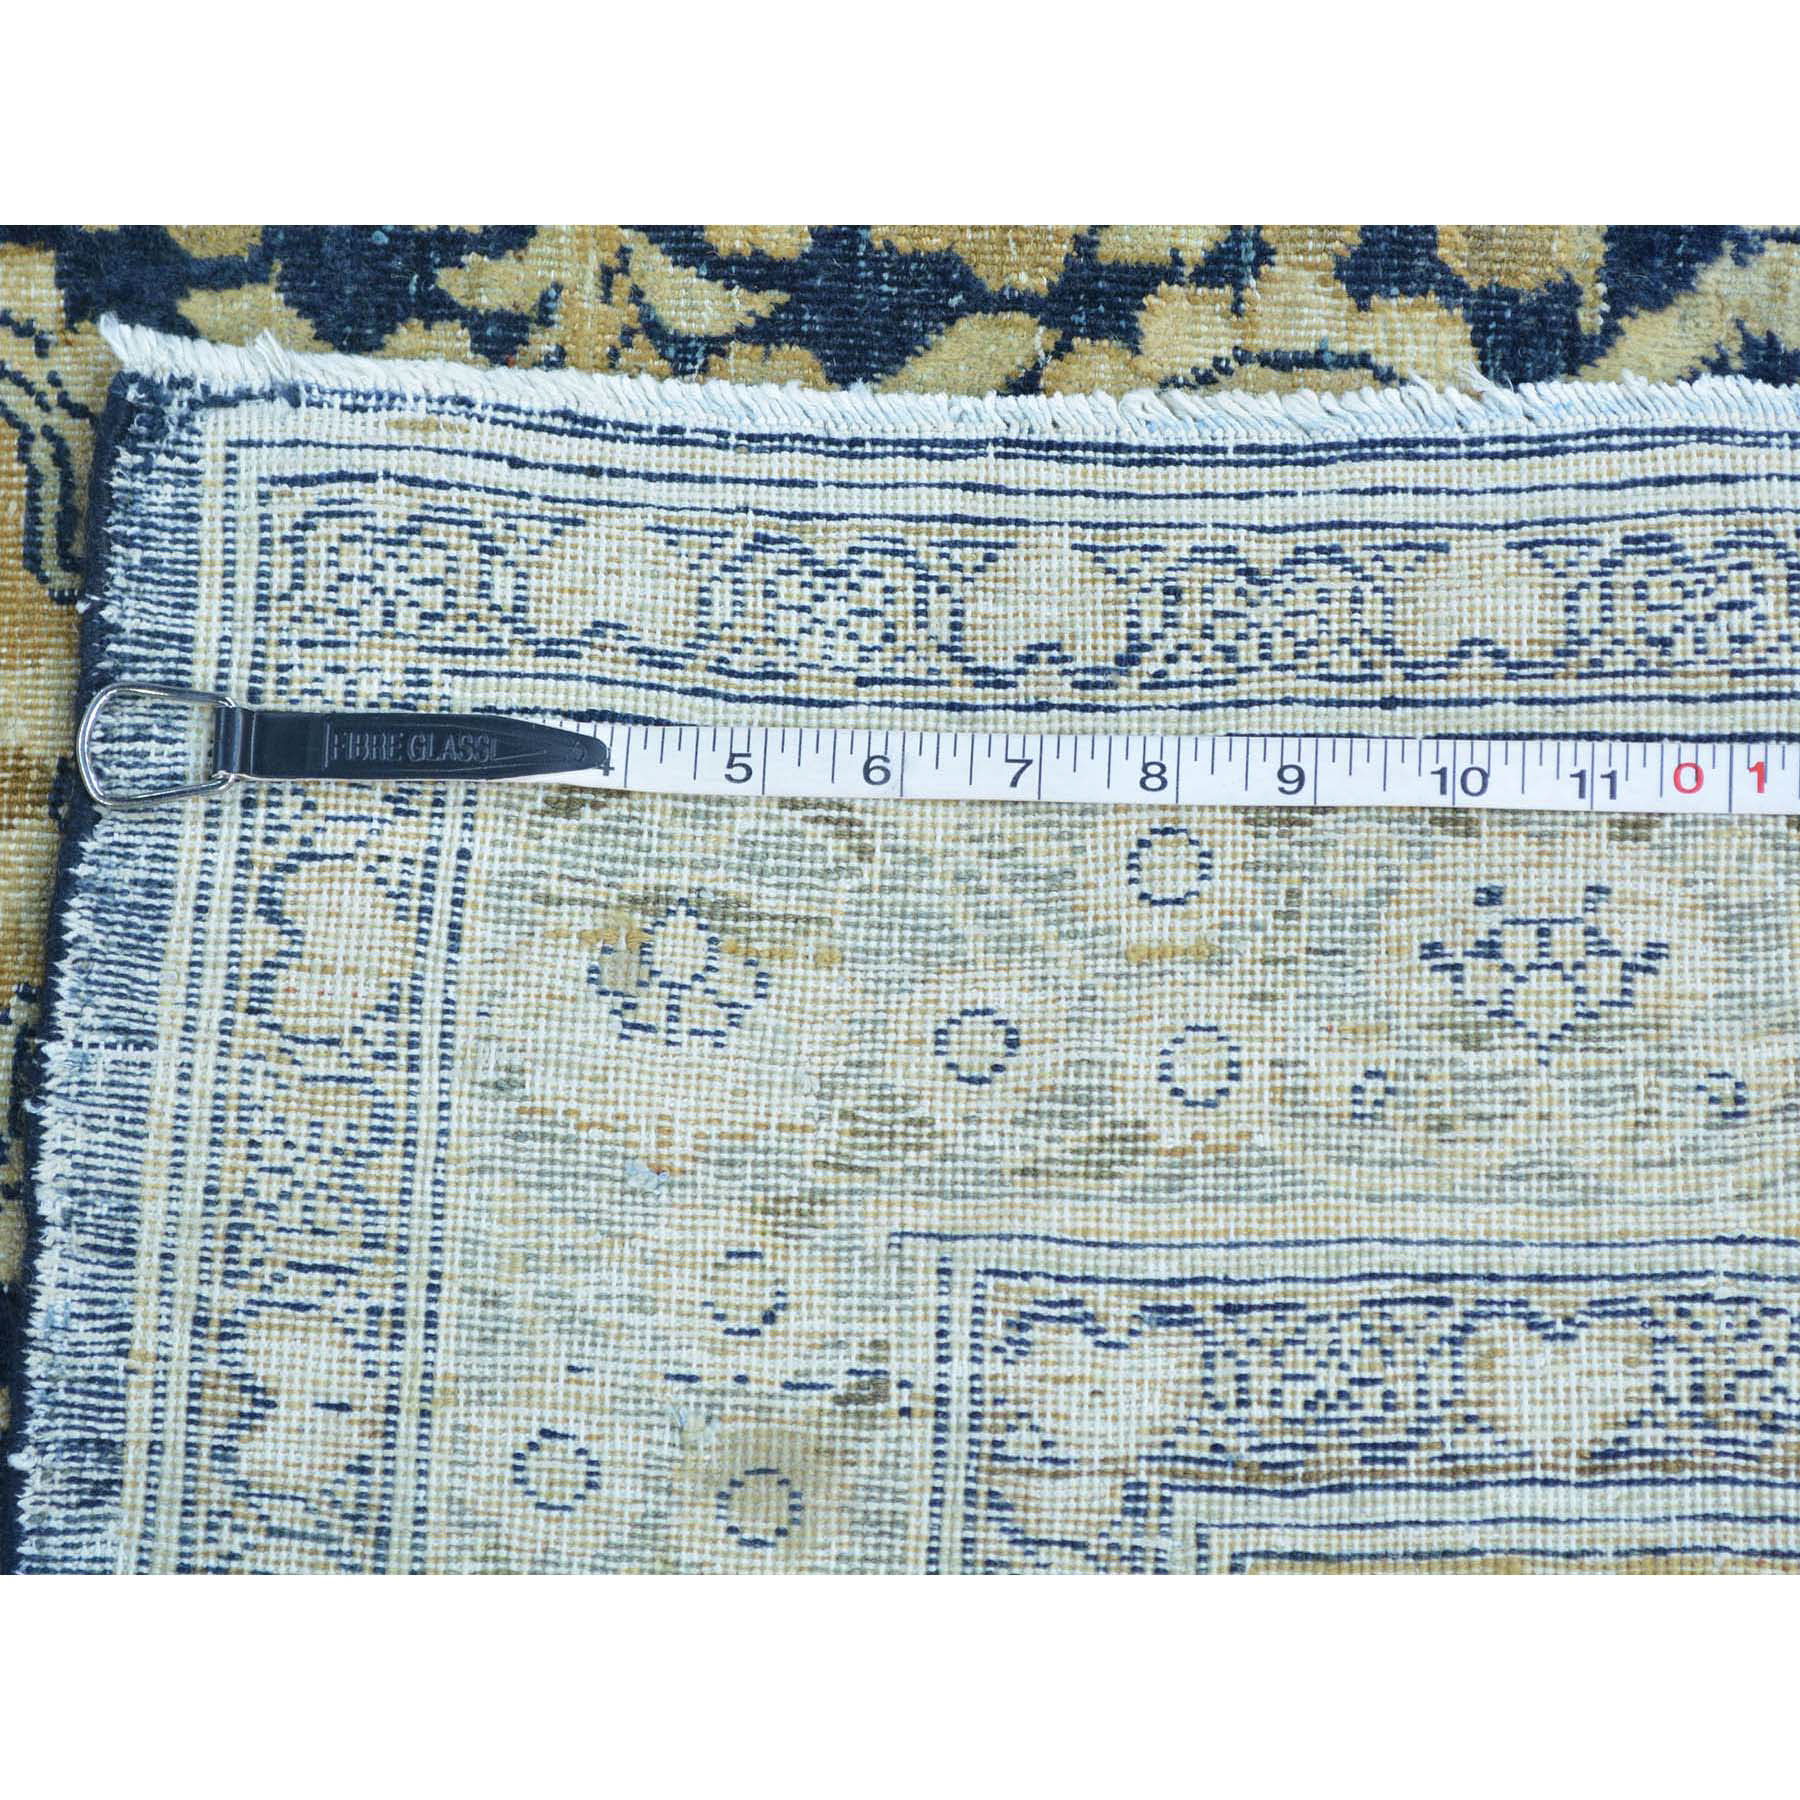 9-5 x14- Antique Persian Kerman Exc Cond Hand Knotted Oriental Rug 